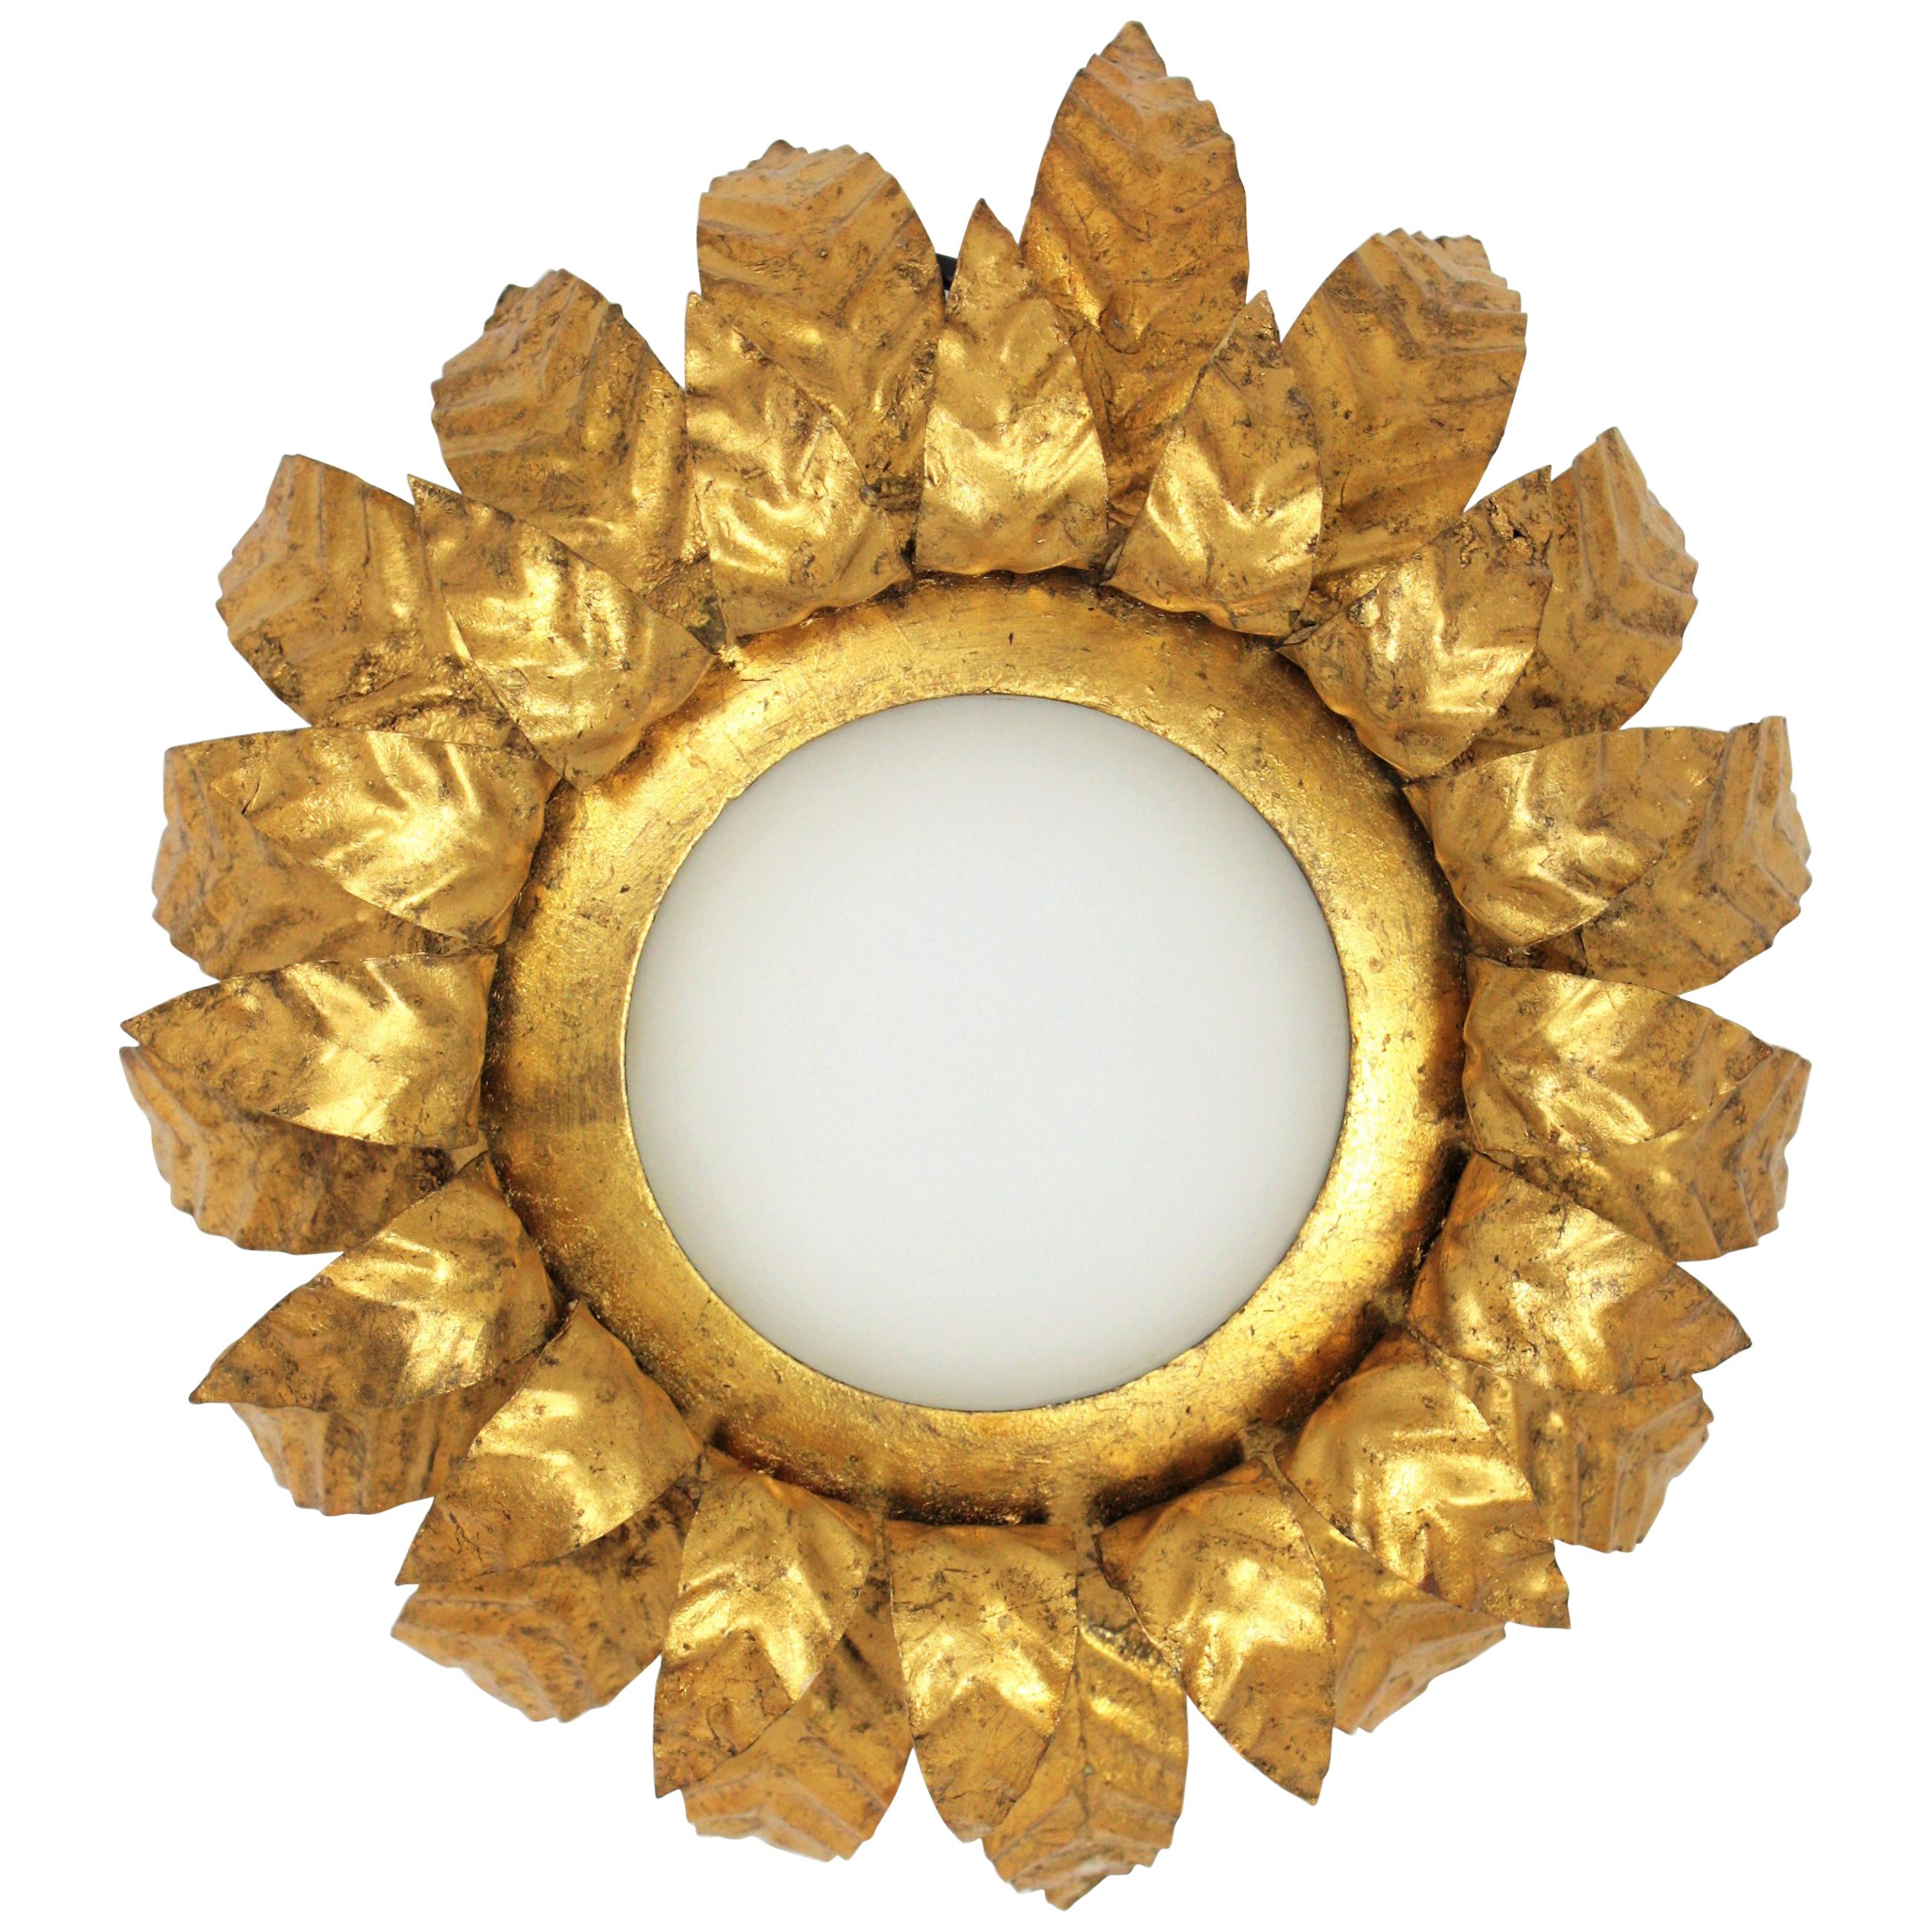 Eye-catching double layered sunburst foliage light fixture with opaline glass shade. Spain, 1950s.
It has an elegant desing and a nice color and patina showing its original gold leaf finishing.
This piece will be a good choice and a lovely